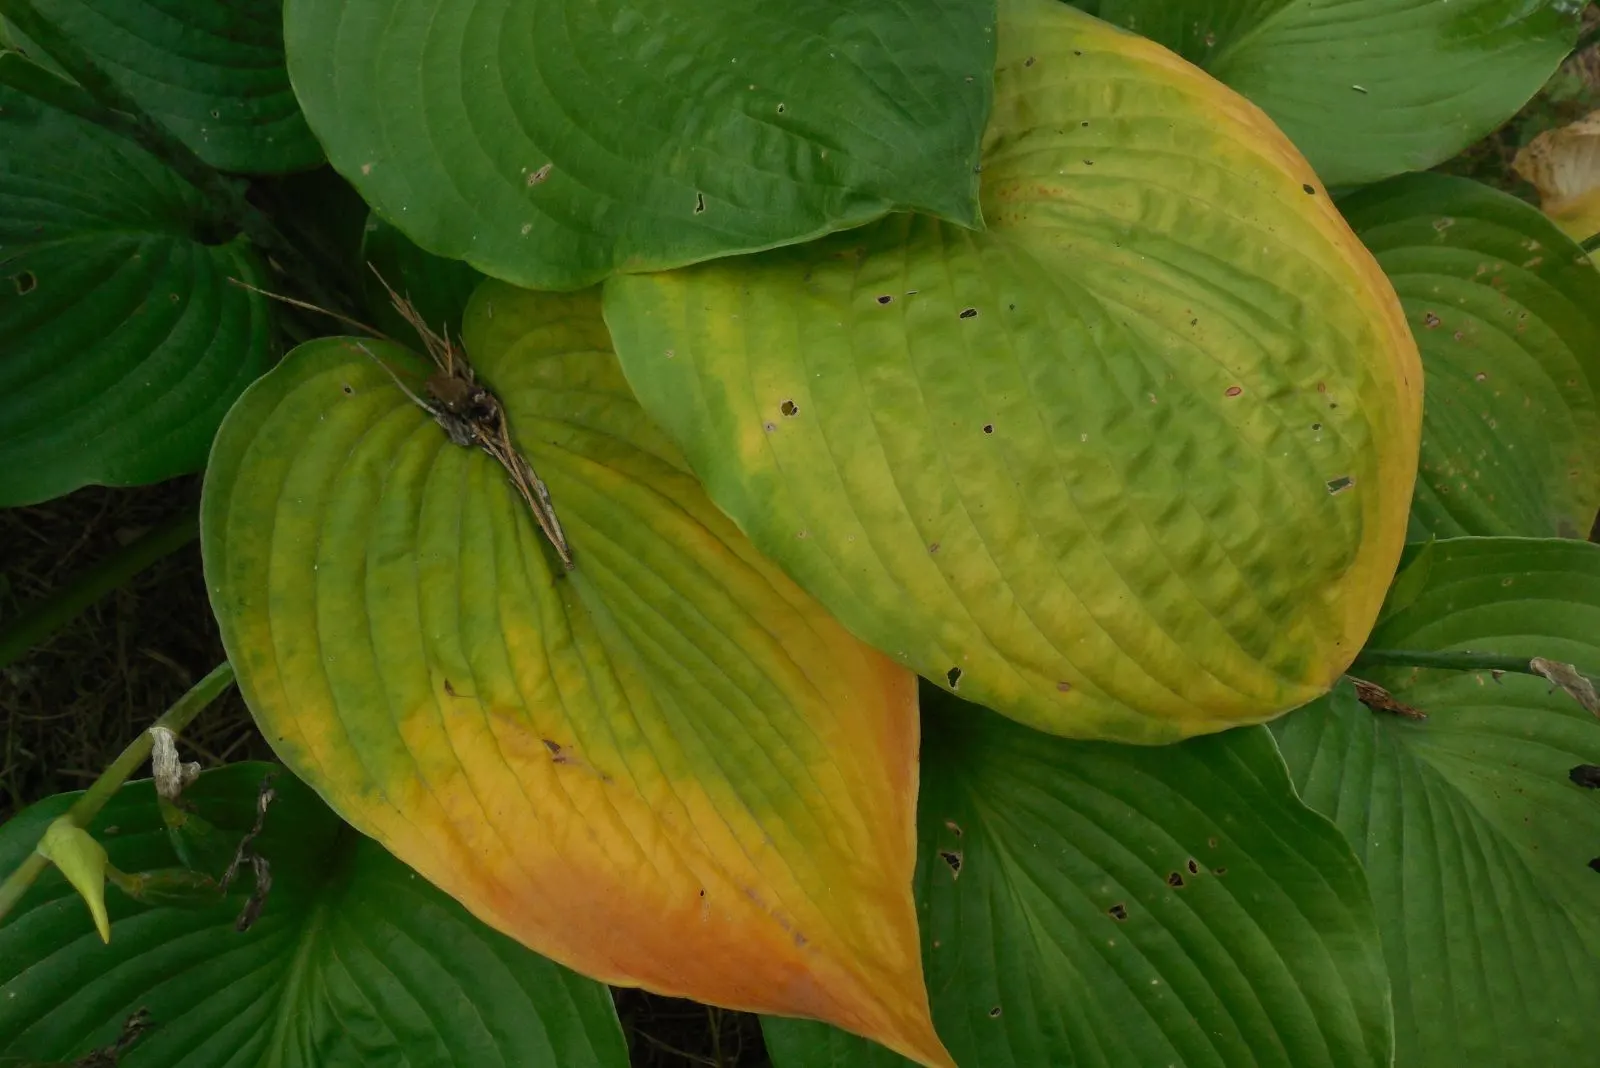 A hosta leaf that has started to turn yellow